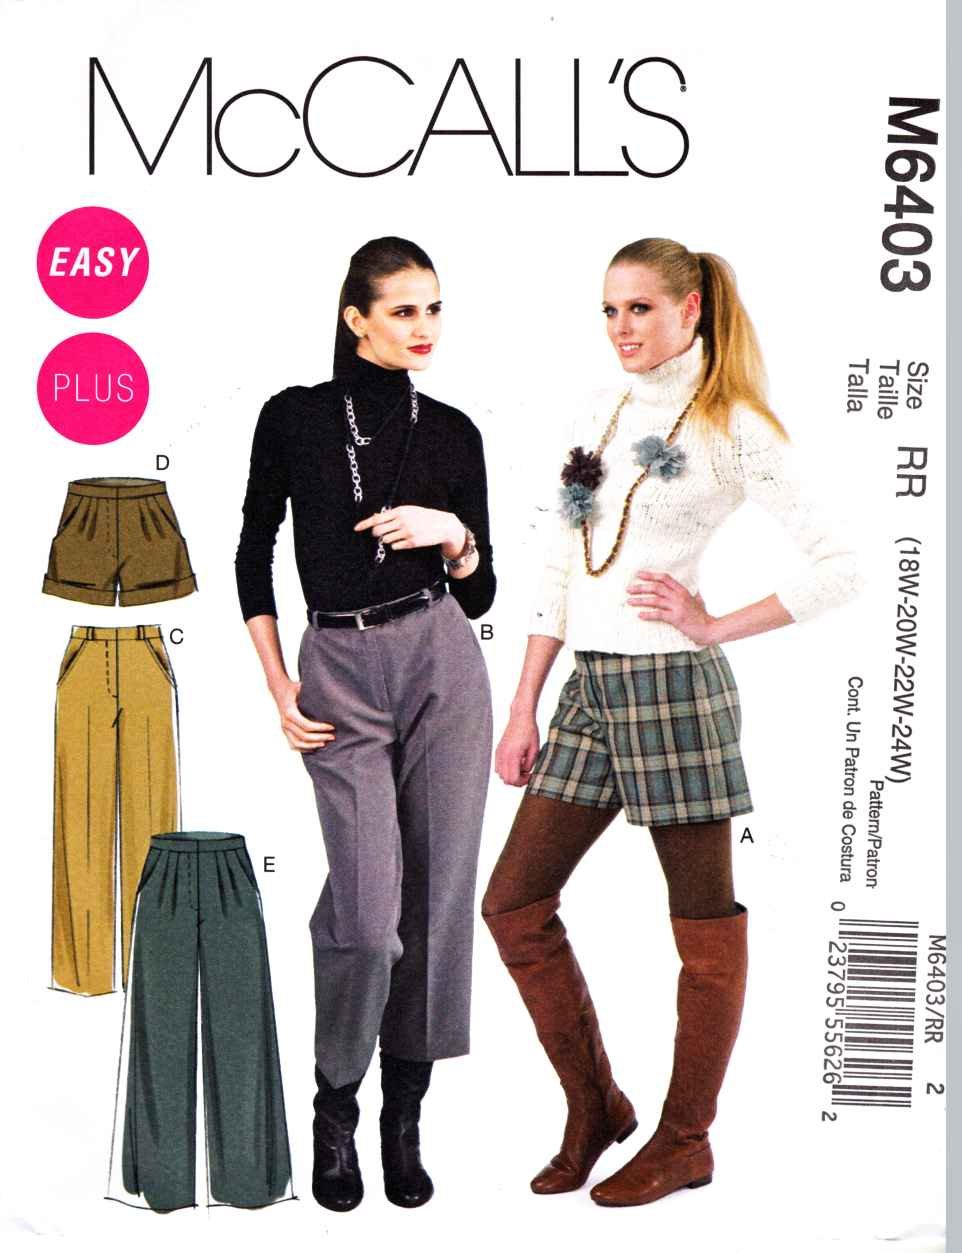 McCalls Sewing Pattern 6403 Misses Size 8-16 Easy Shorts Cropped Capri ...